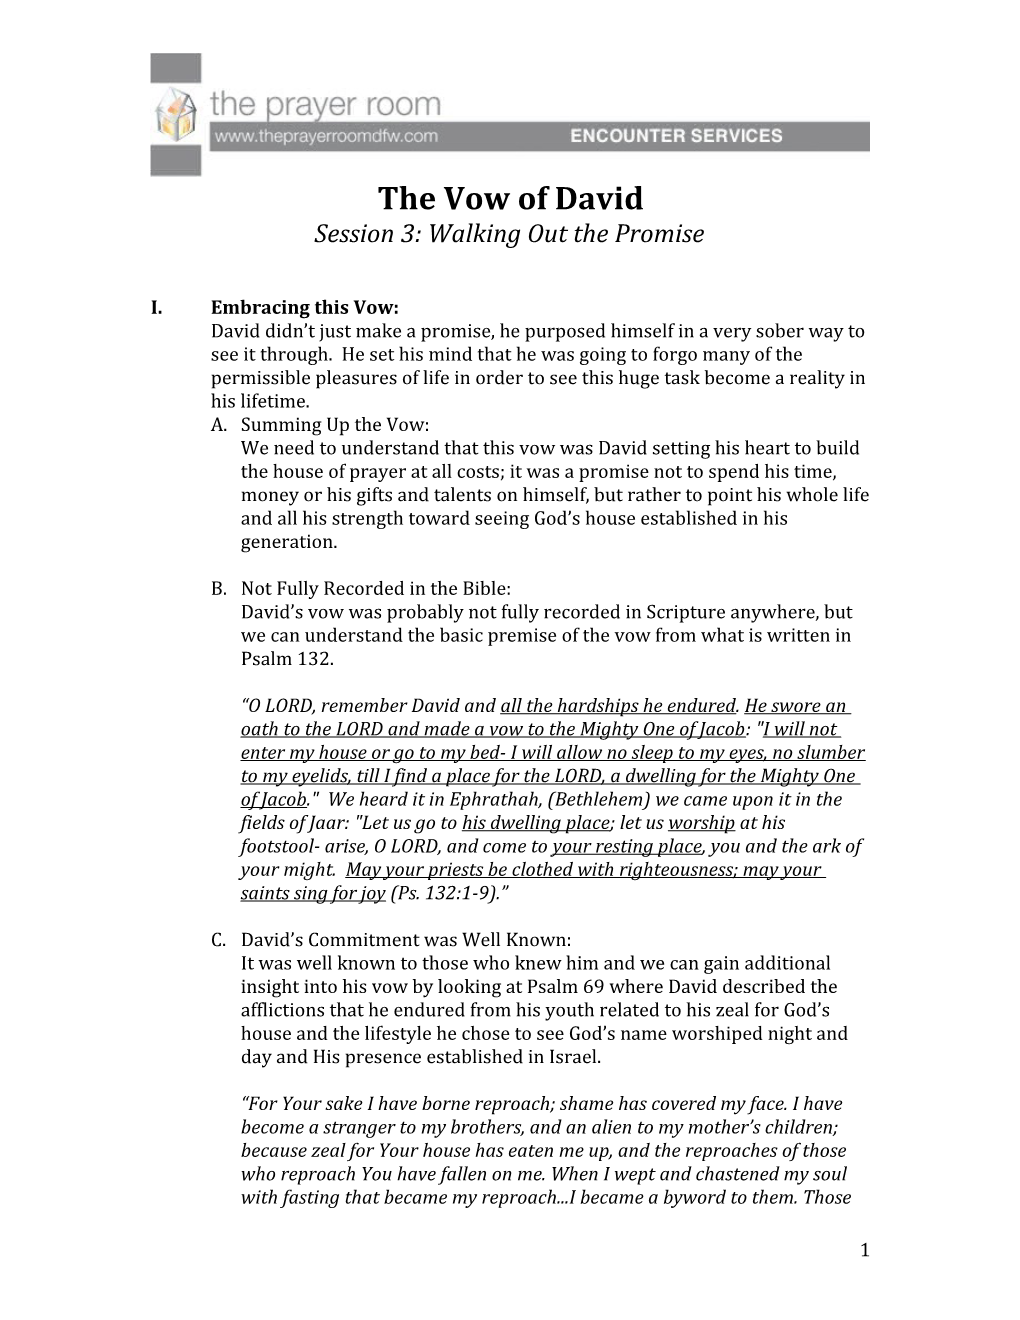 The Vow of David